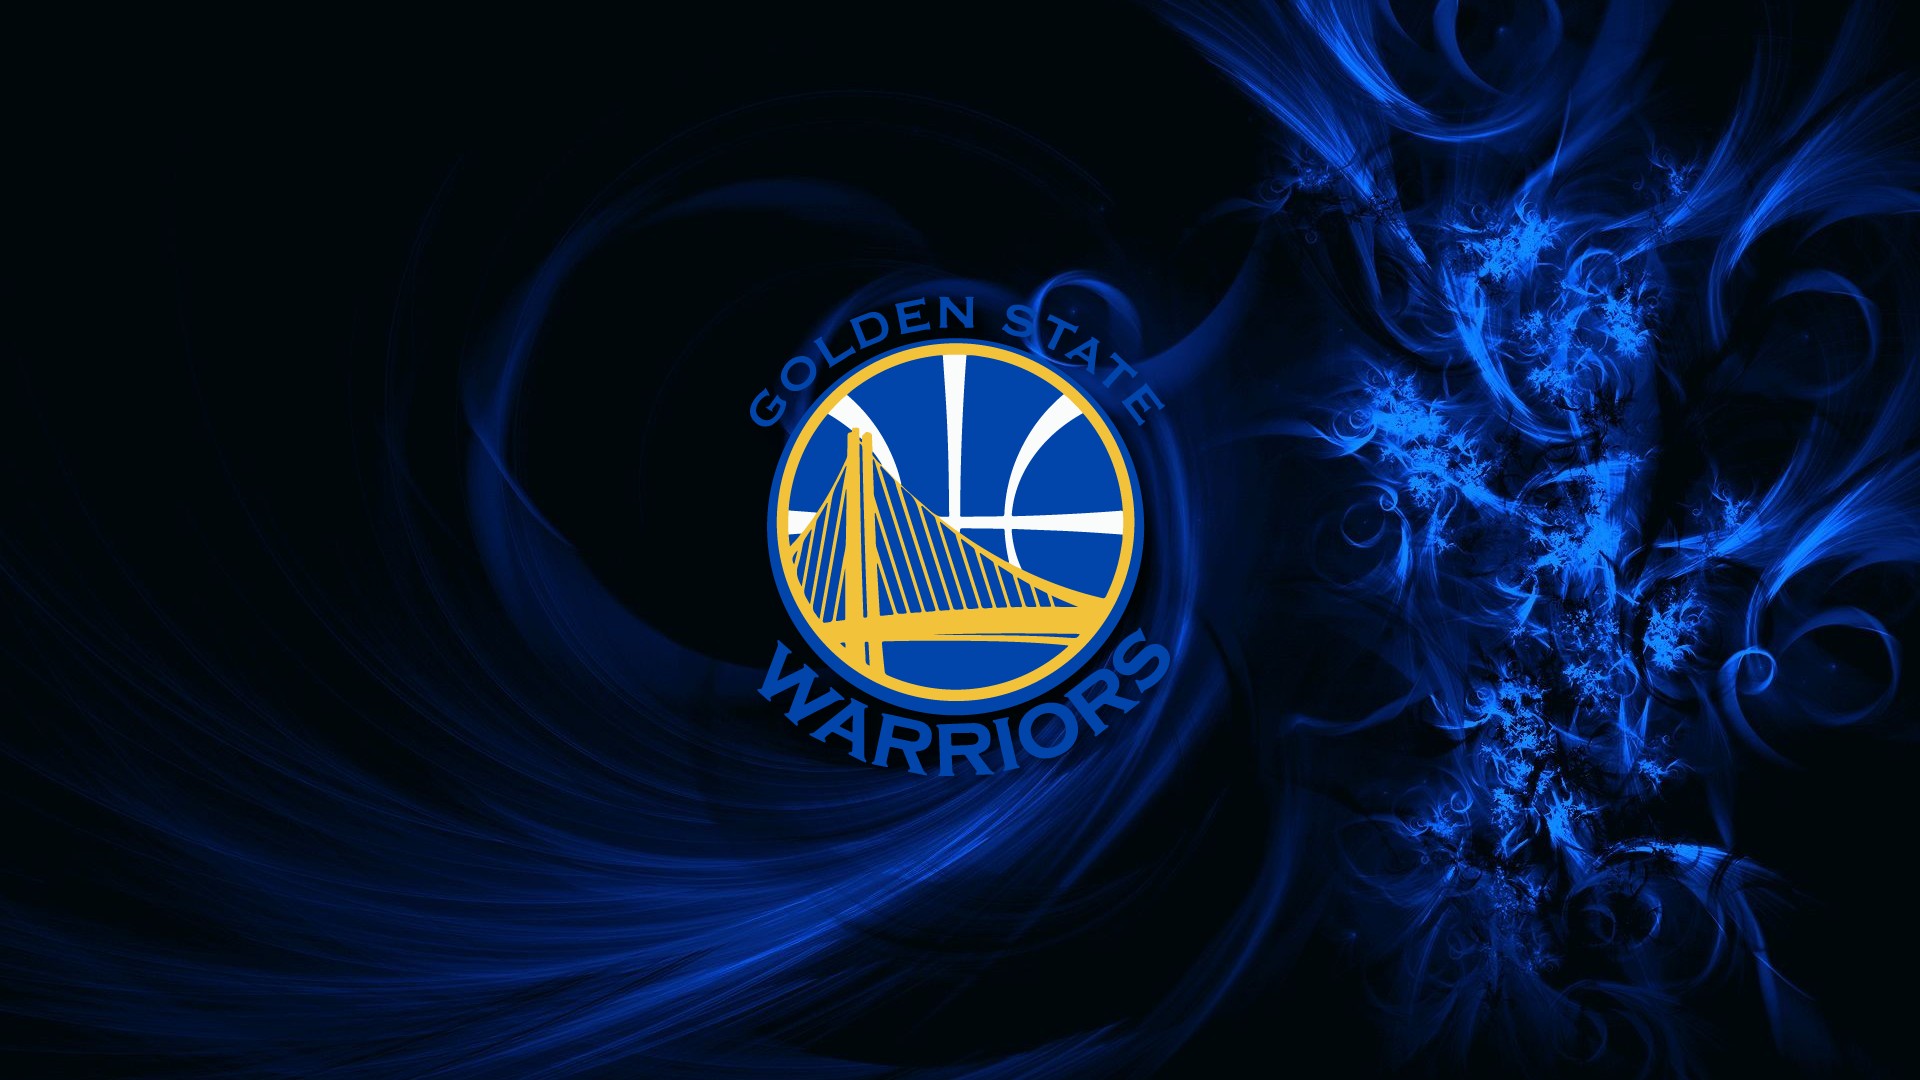 Wallpaper Golden State Warriors HD With Resolution 1920X1080 pixel. You can make this wallpaper for your Desktop Computer Backgrounds, Mac Wallpapers, Android Lock screen or iPhone Screensavers